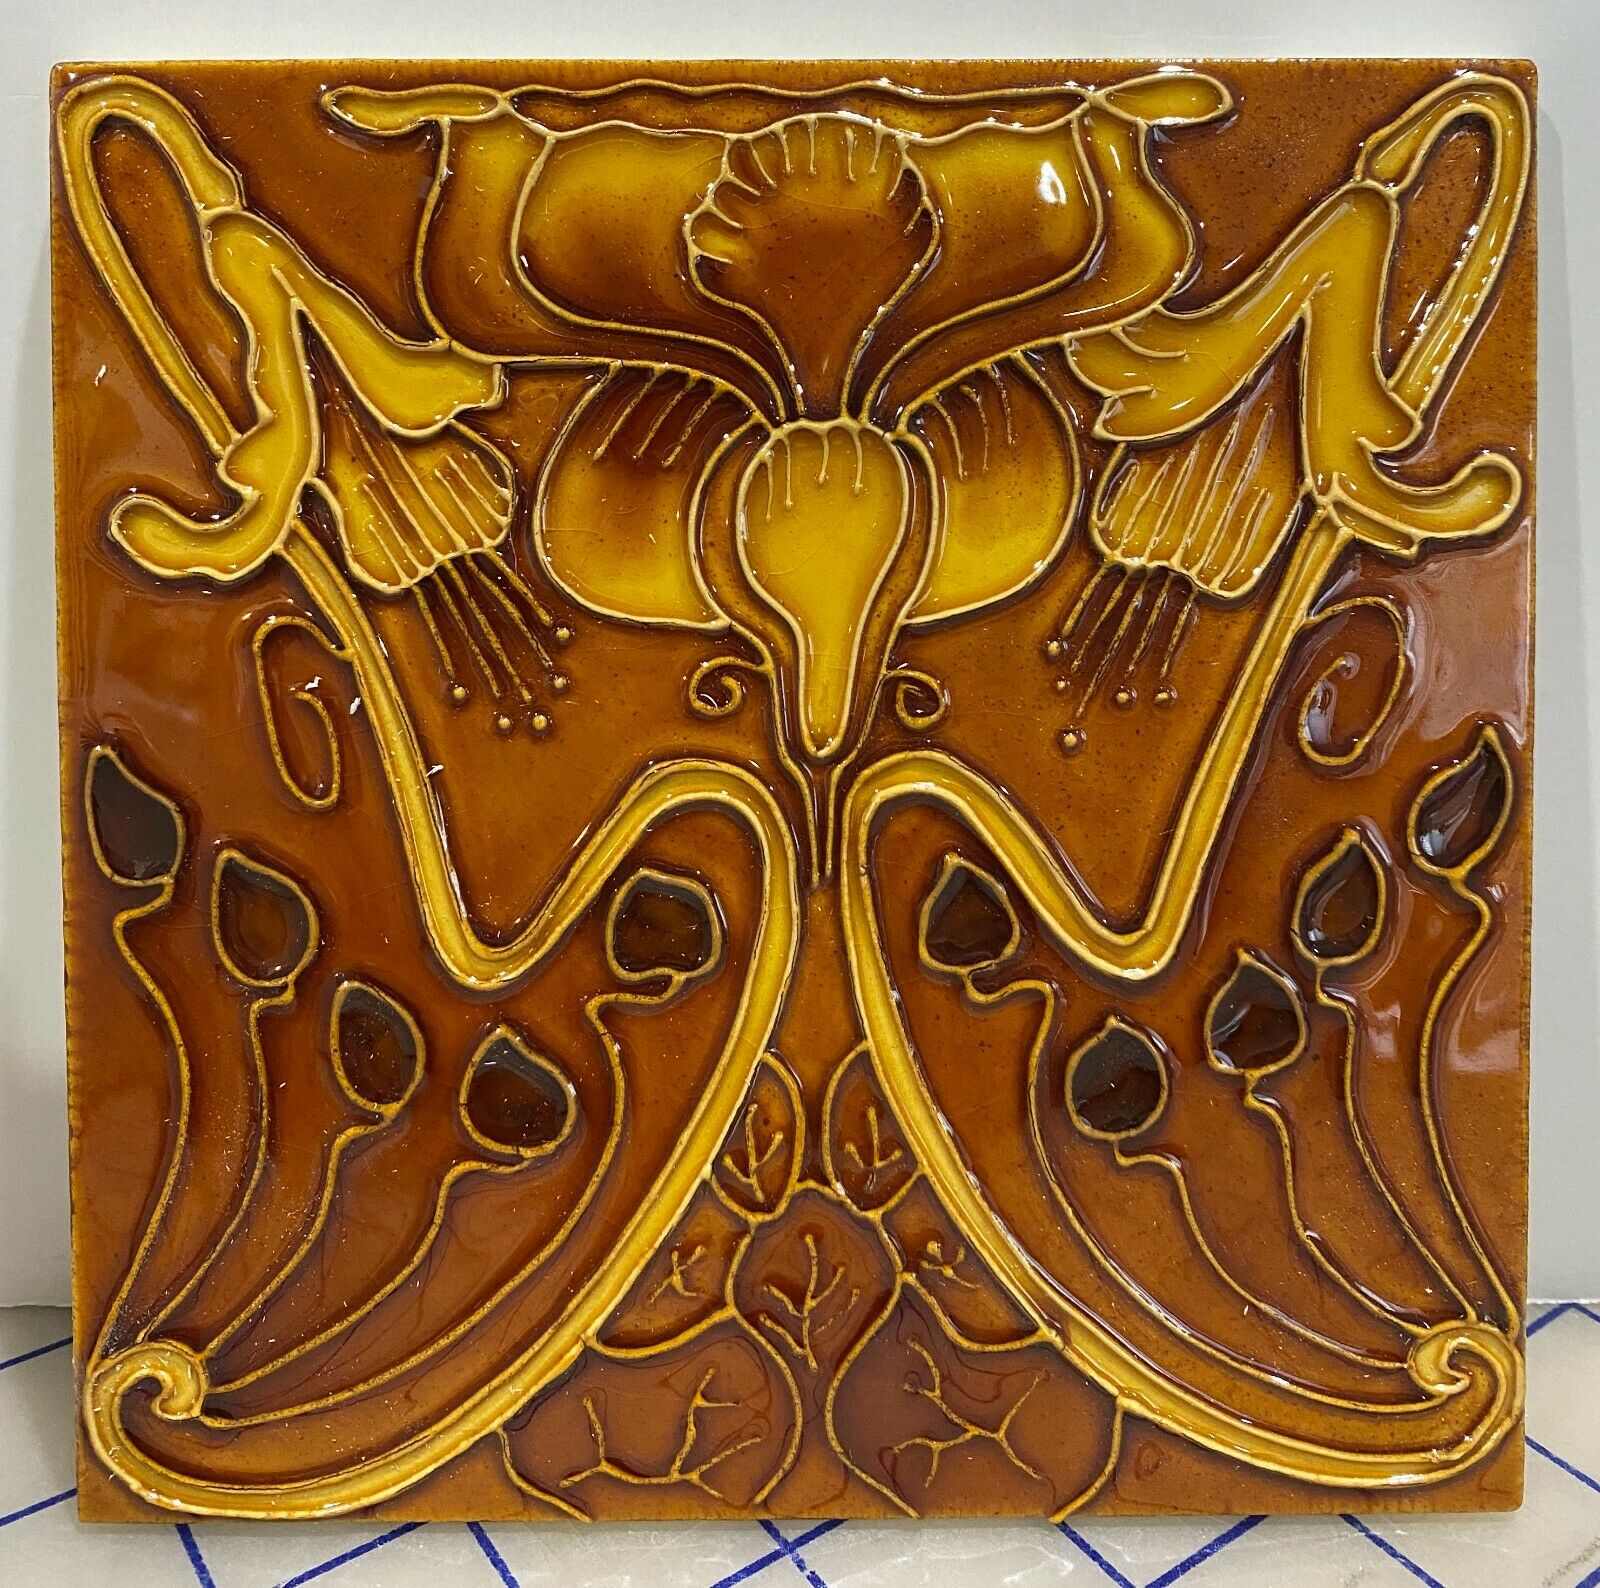 Rare Art Nouveau Majolica Tile Embossed 6 X 6 Inch Collectible Golden Flower